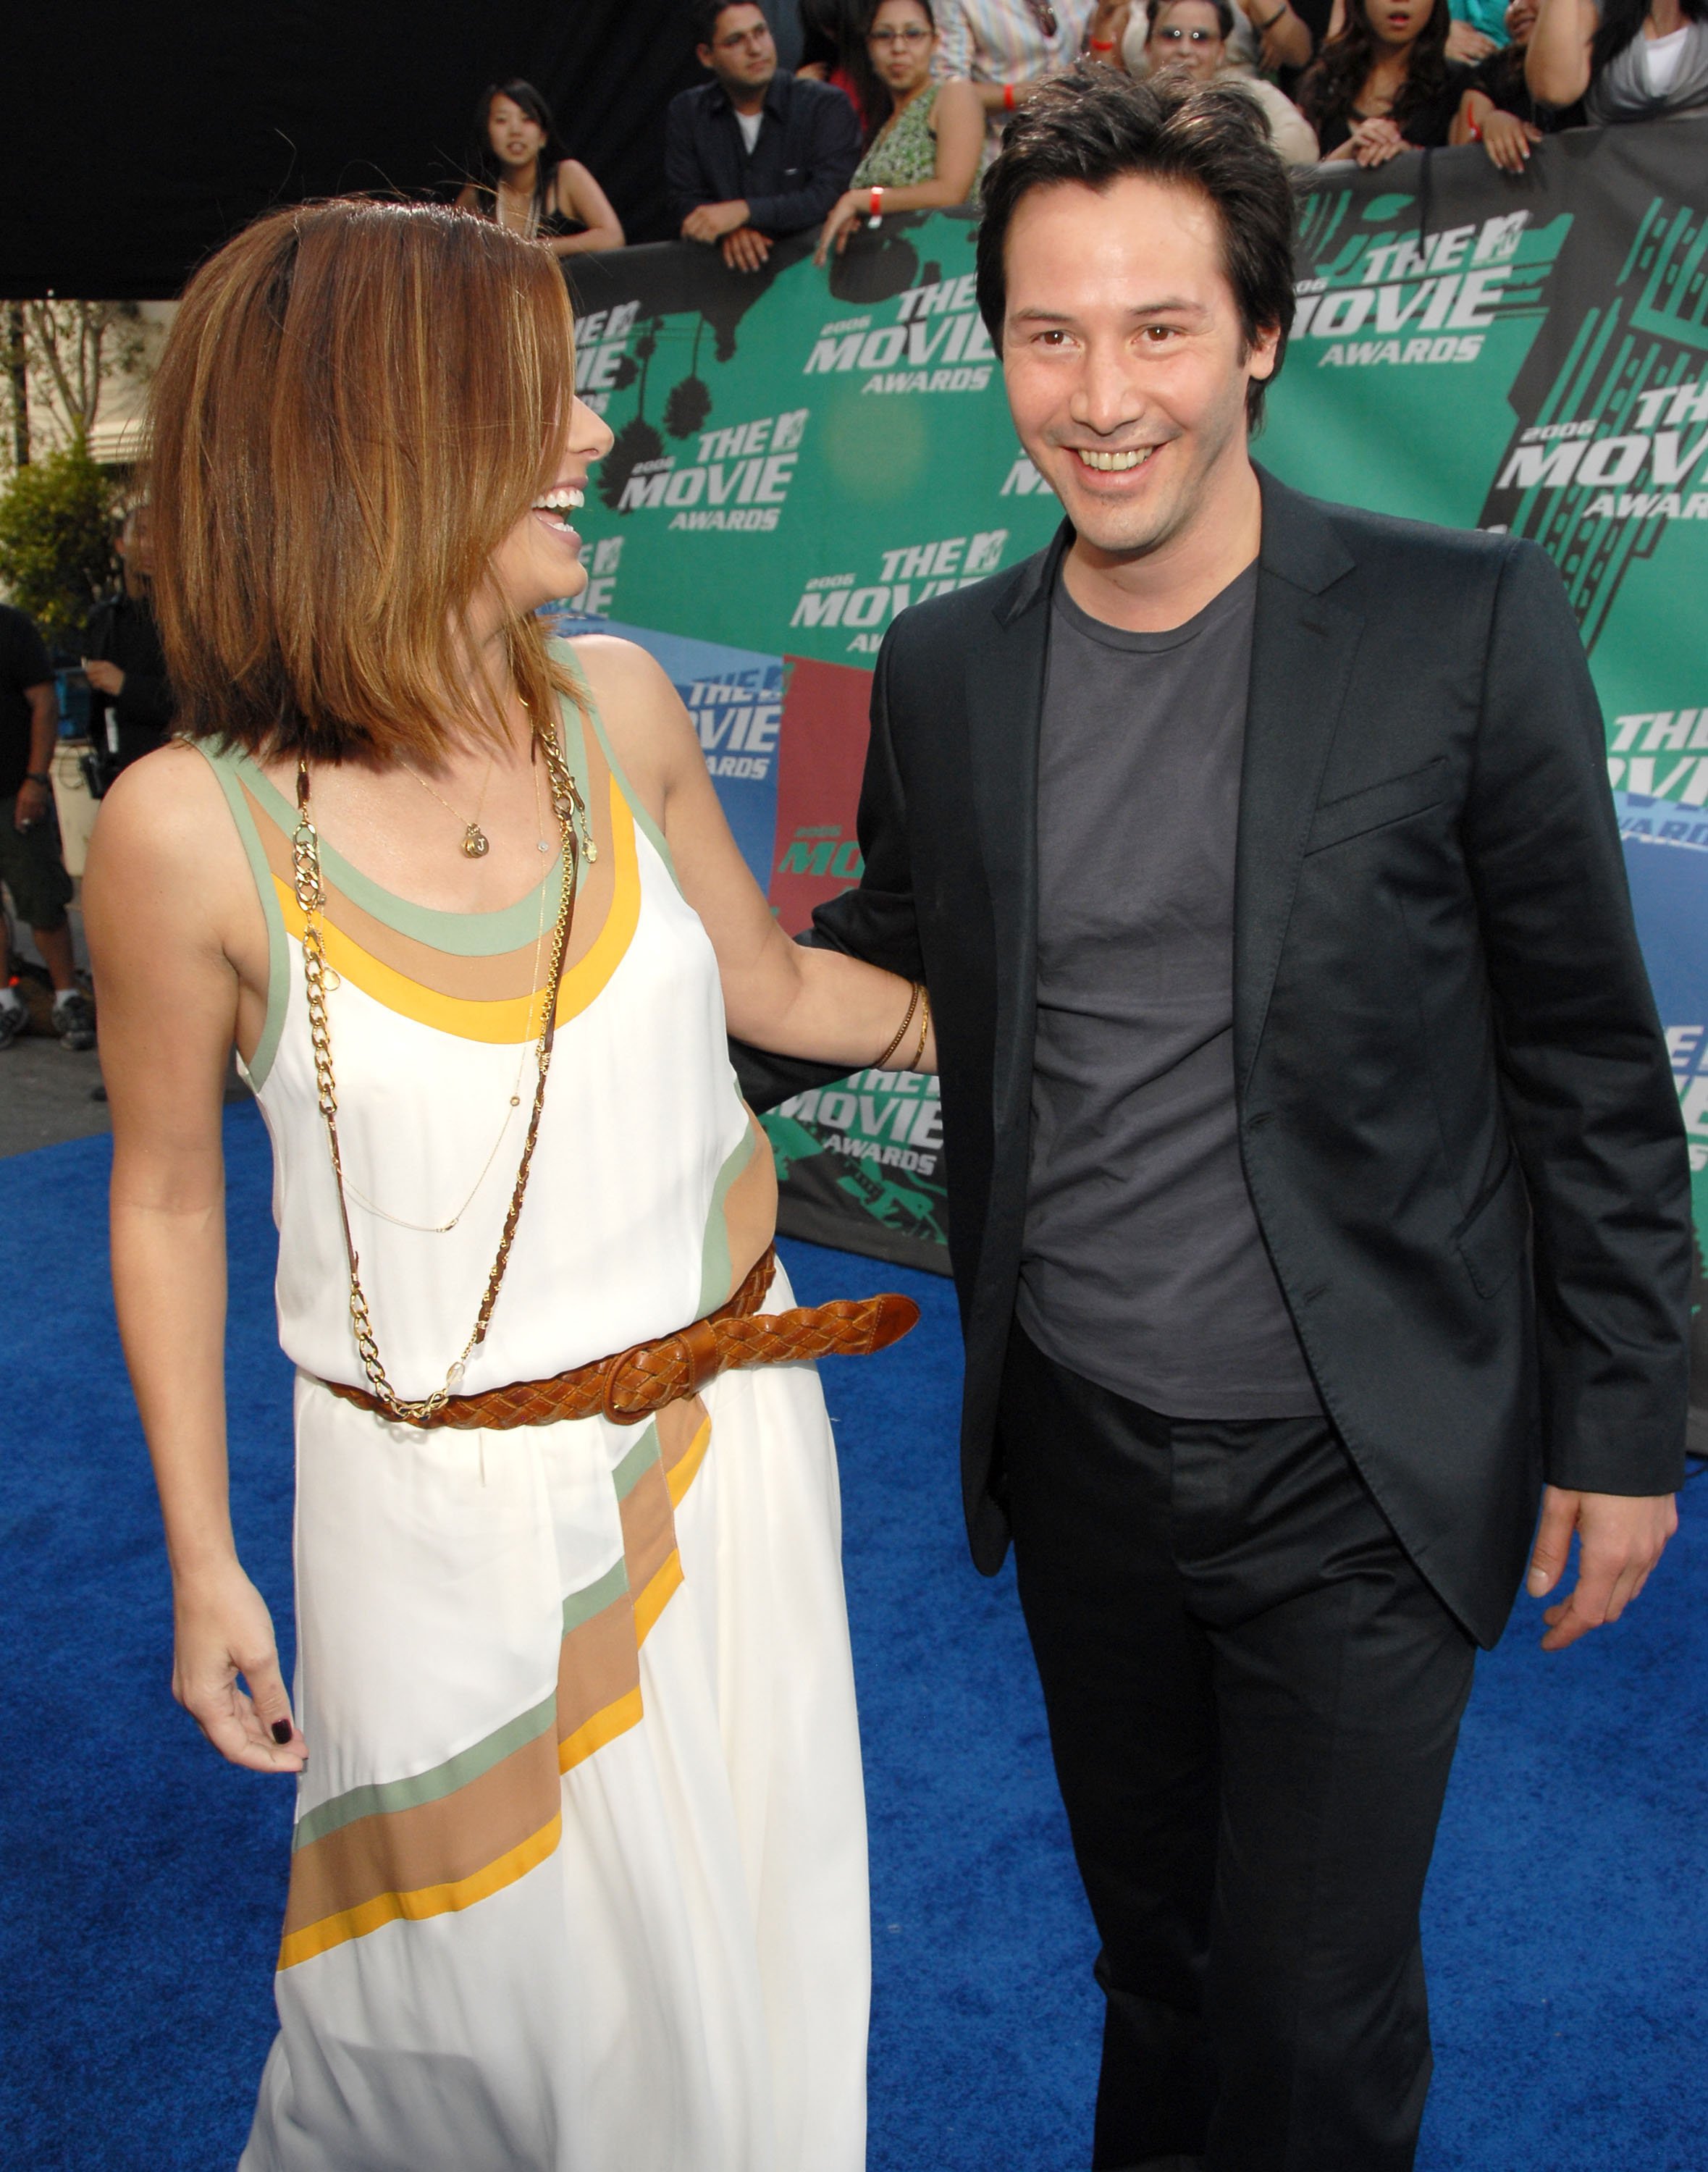 Keanu Reeves and Sandra Bullock, on the red carpet at the 2006 MTV Movie Awards Show at Sony Studios on June 3, 2006 in Culver City, California. | Source: Getty Images